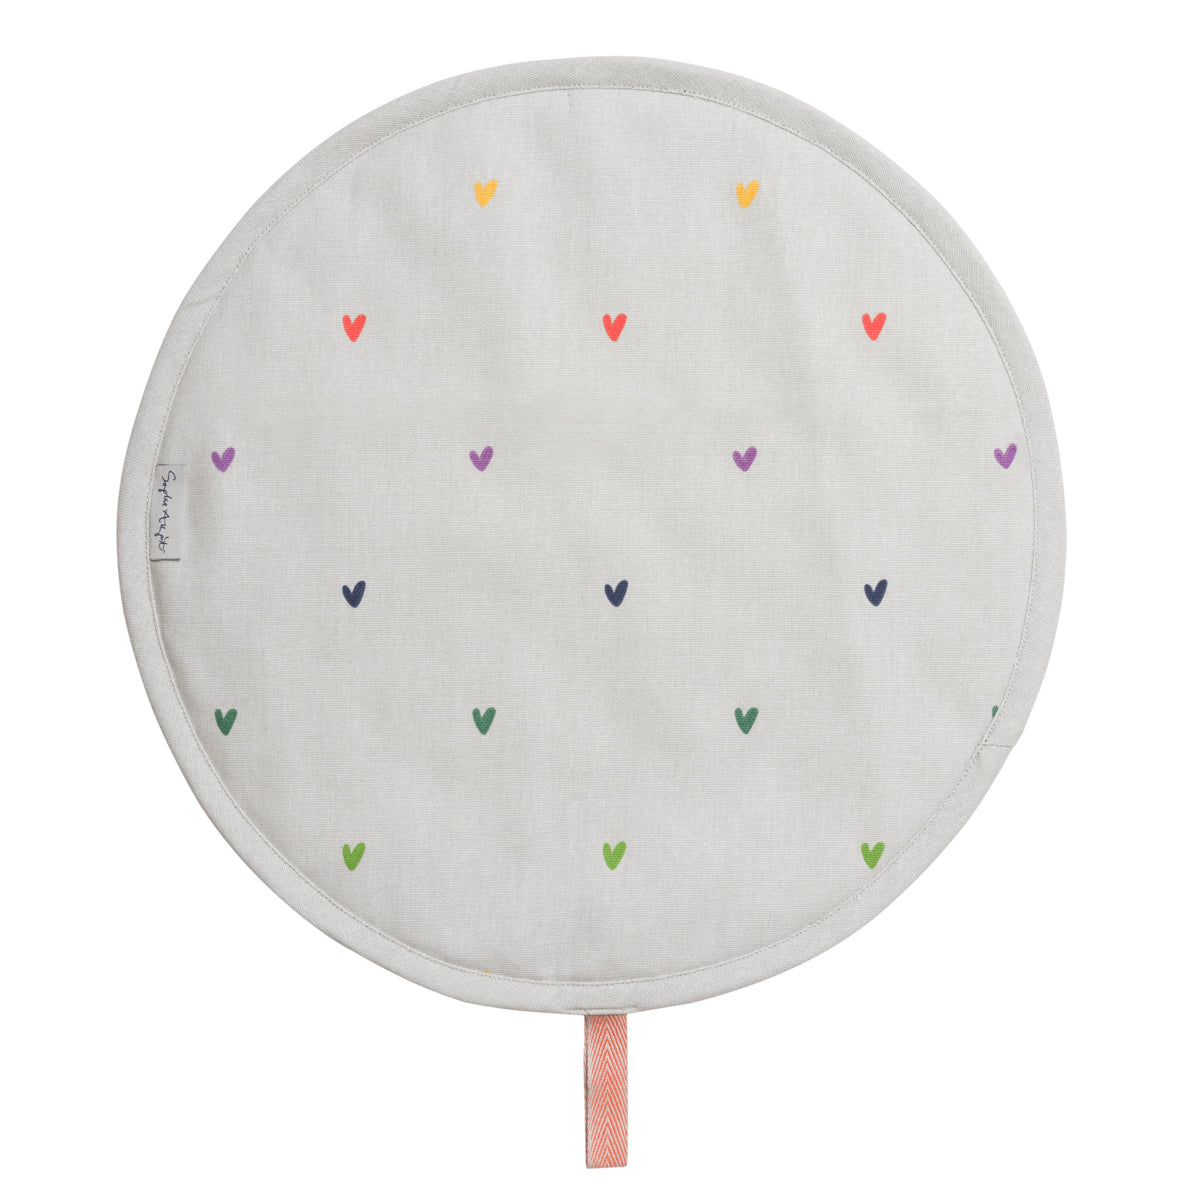 Multicoloured Hearts Circular Hob Cover by Sophie Allport